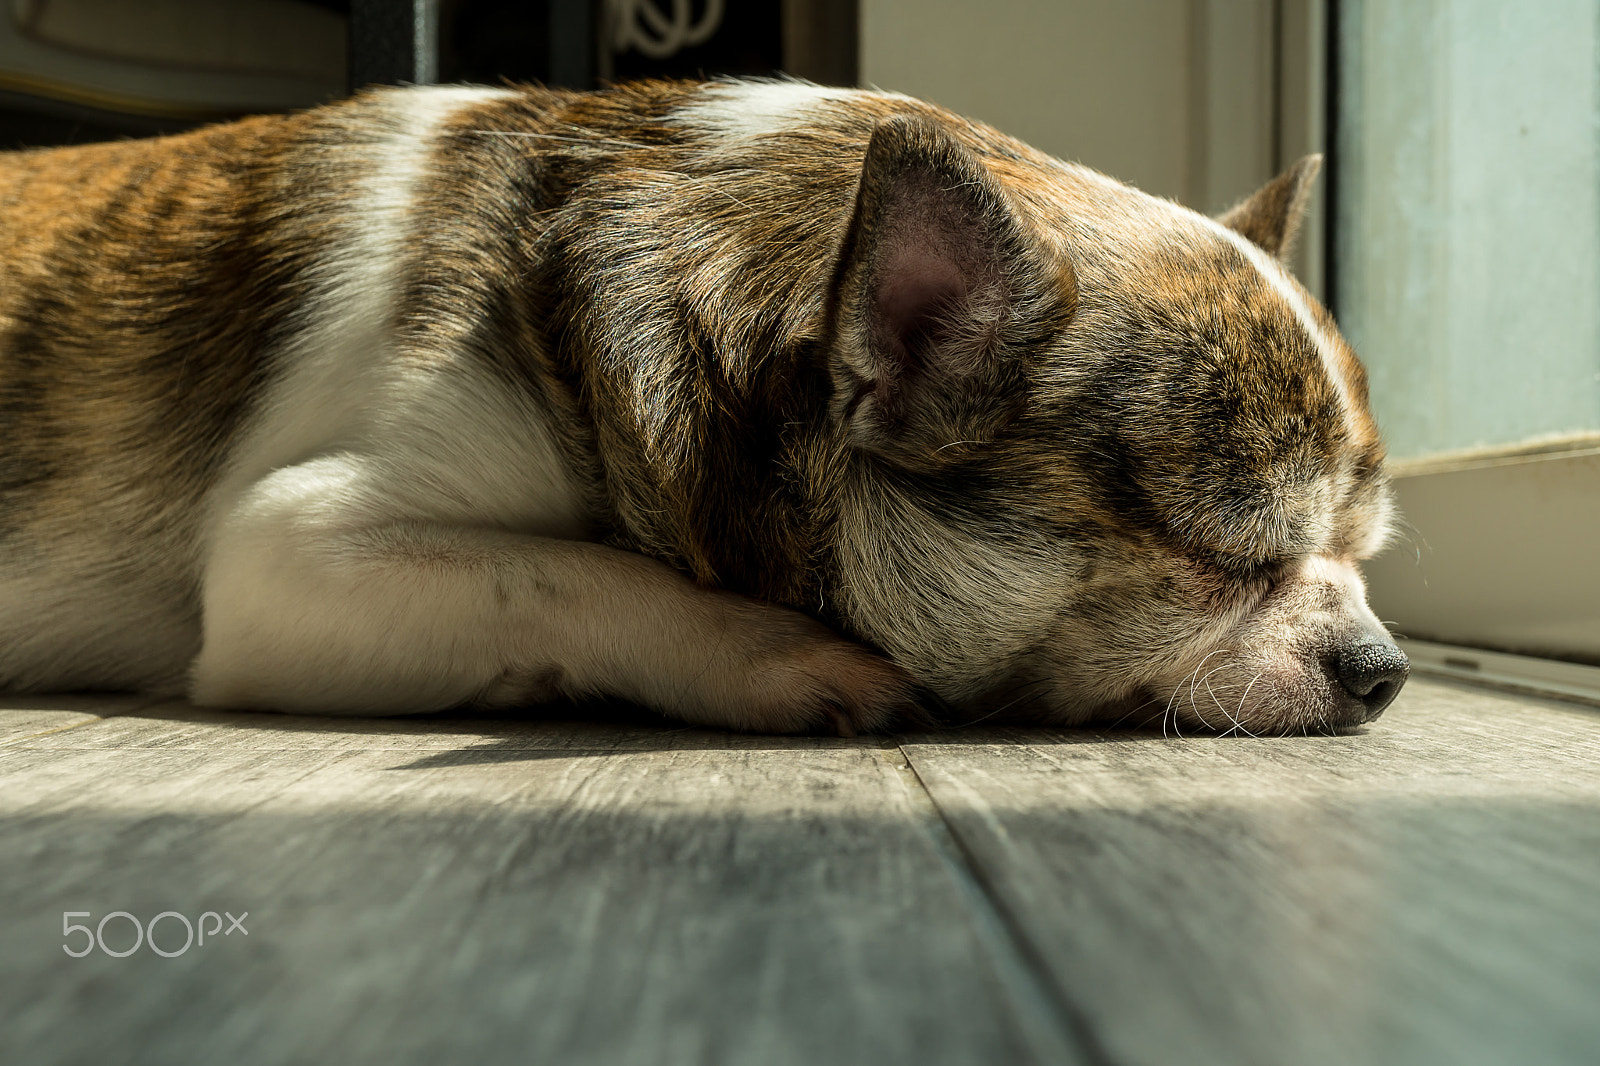 Sony a6300 sample photo. Chihuahua tiger hairs lethargic on the floor photography